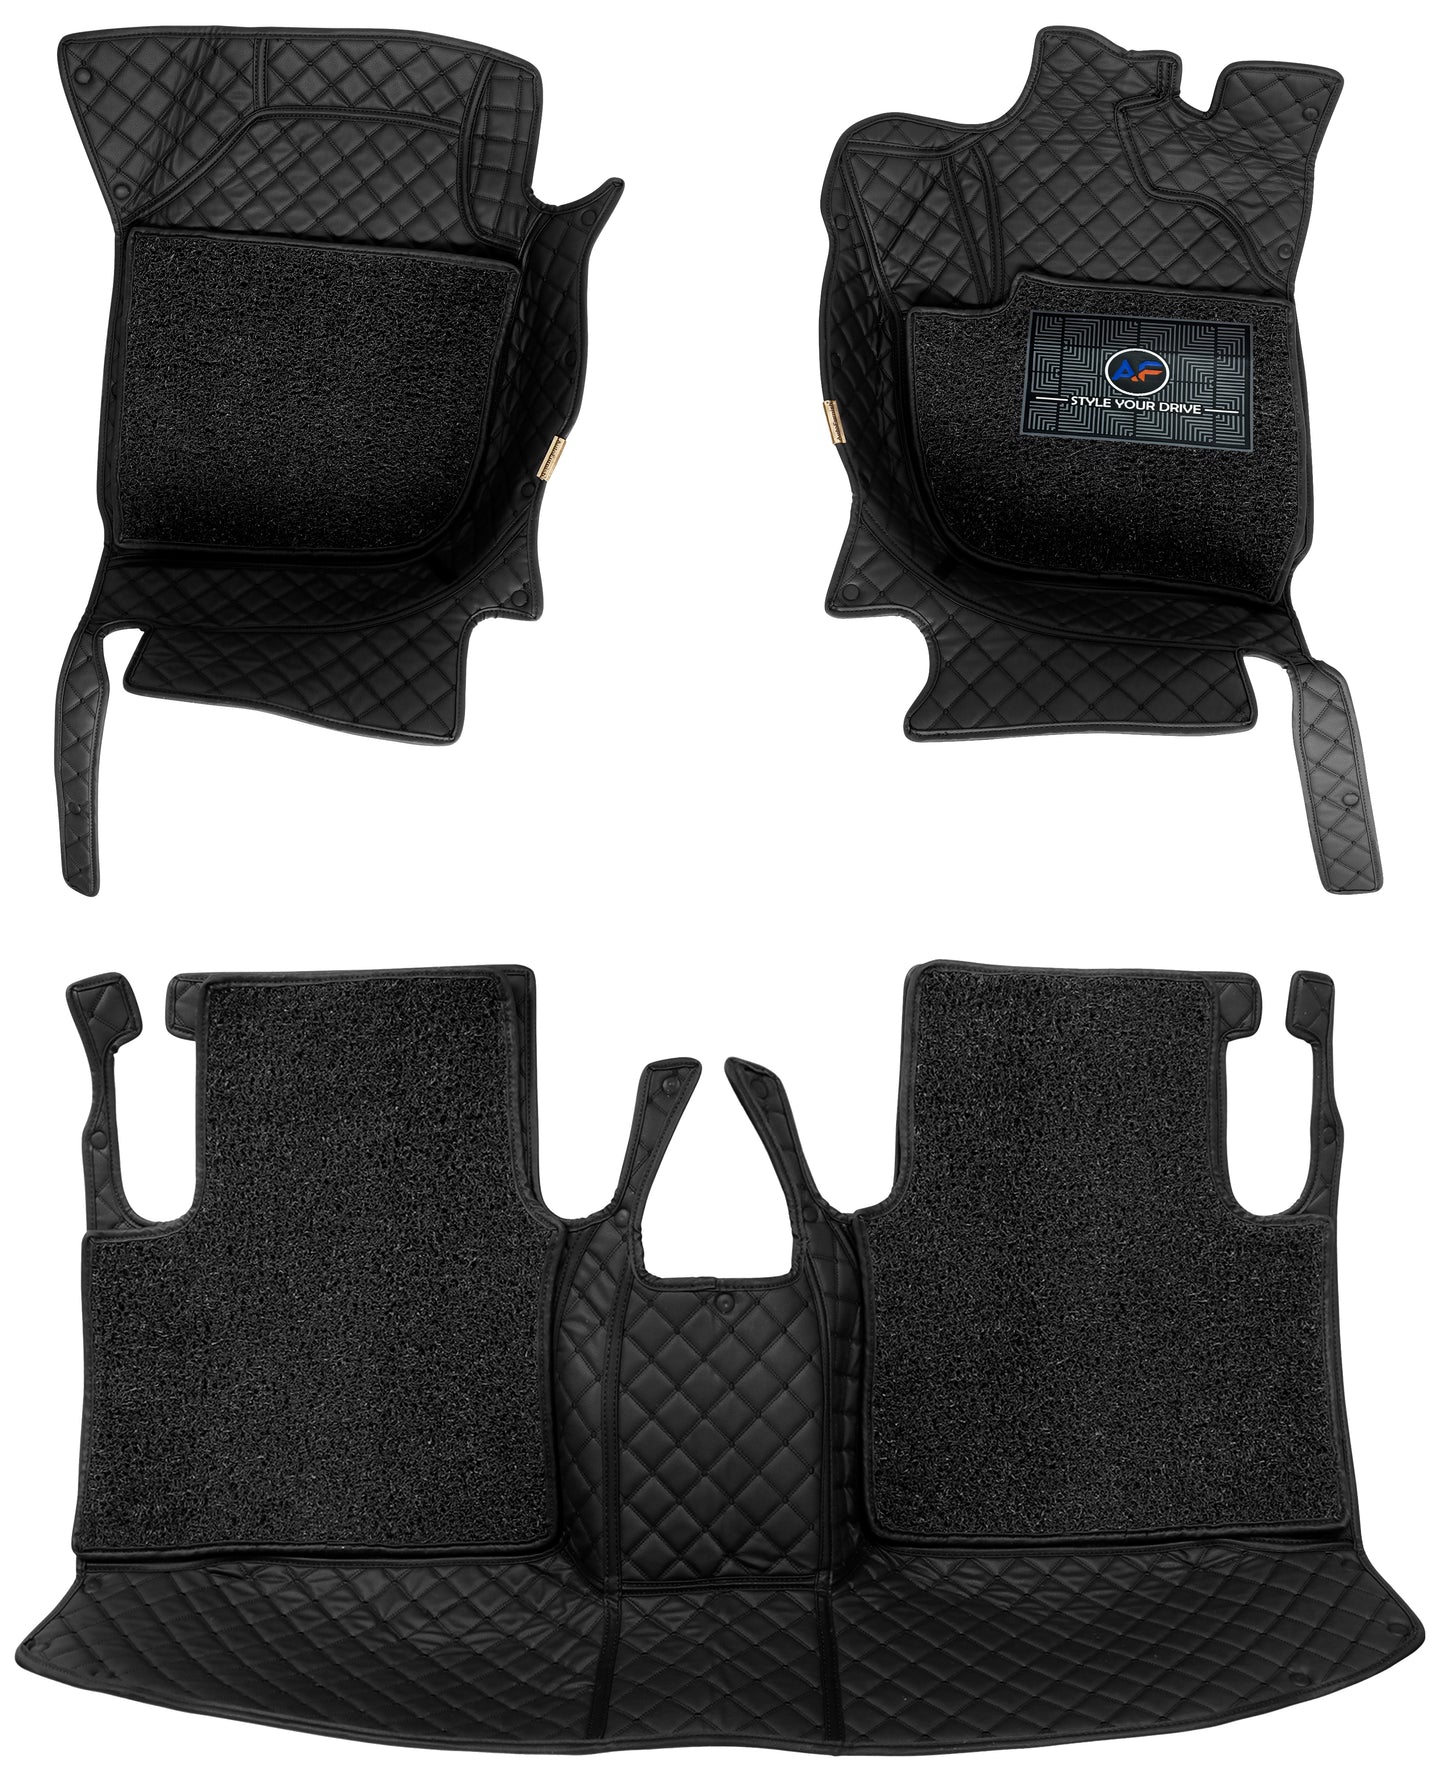 Volvo S60 (2015-21)-7D Luxury Car Mat, All Weather Proof, Anti-Skid, 100% Waterproof & Odorless with Unique Diamond Fish Design (24mm Luxury PU Leather, 2 Rows)